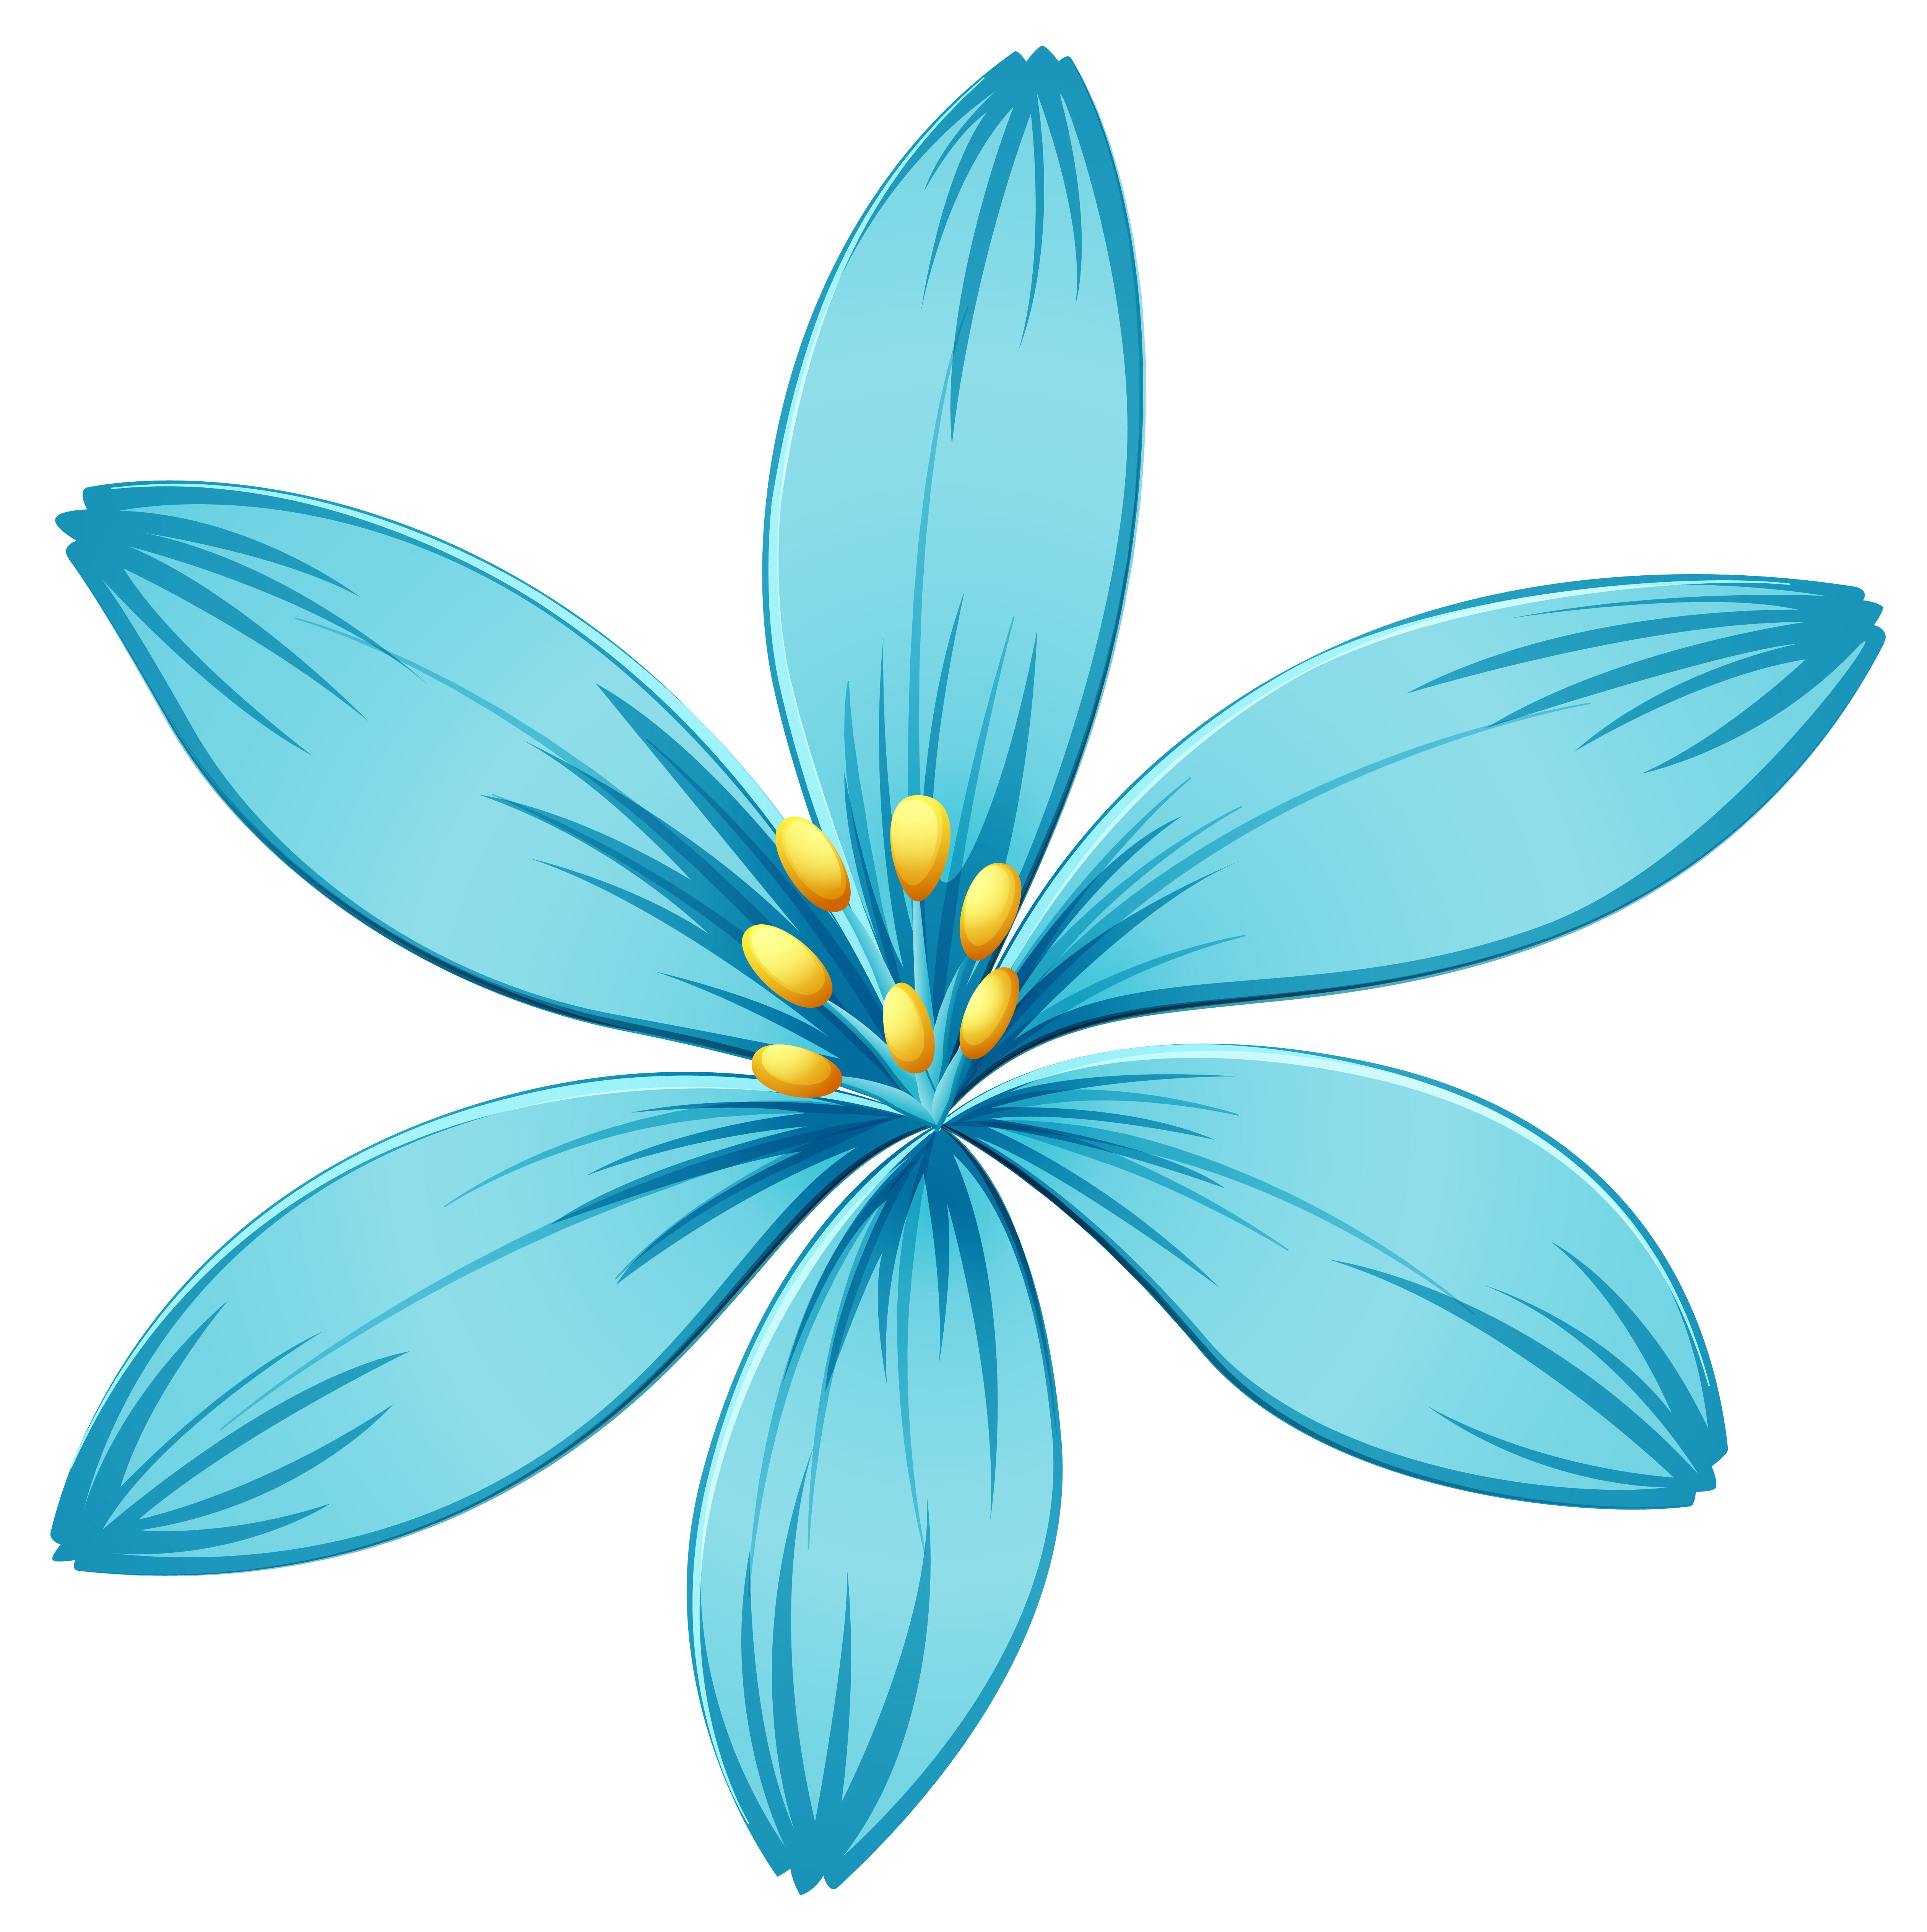 png format images of flowers